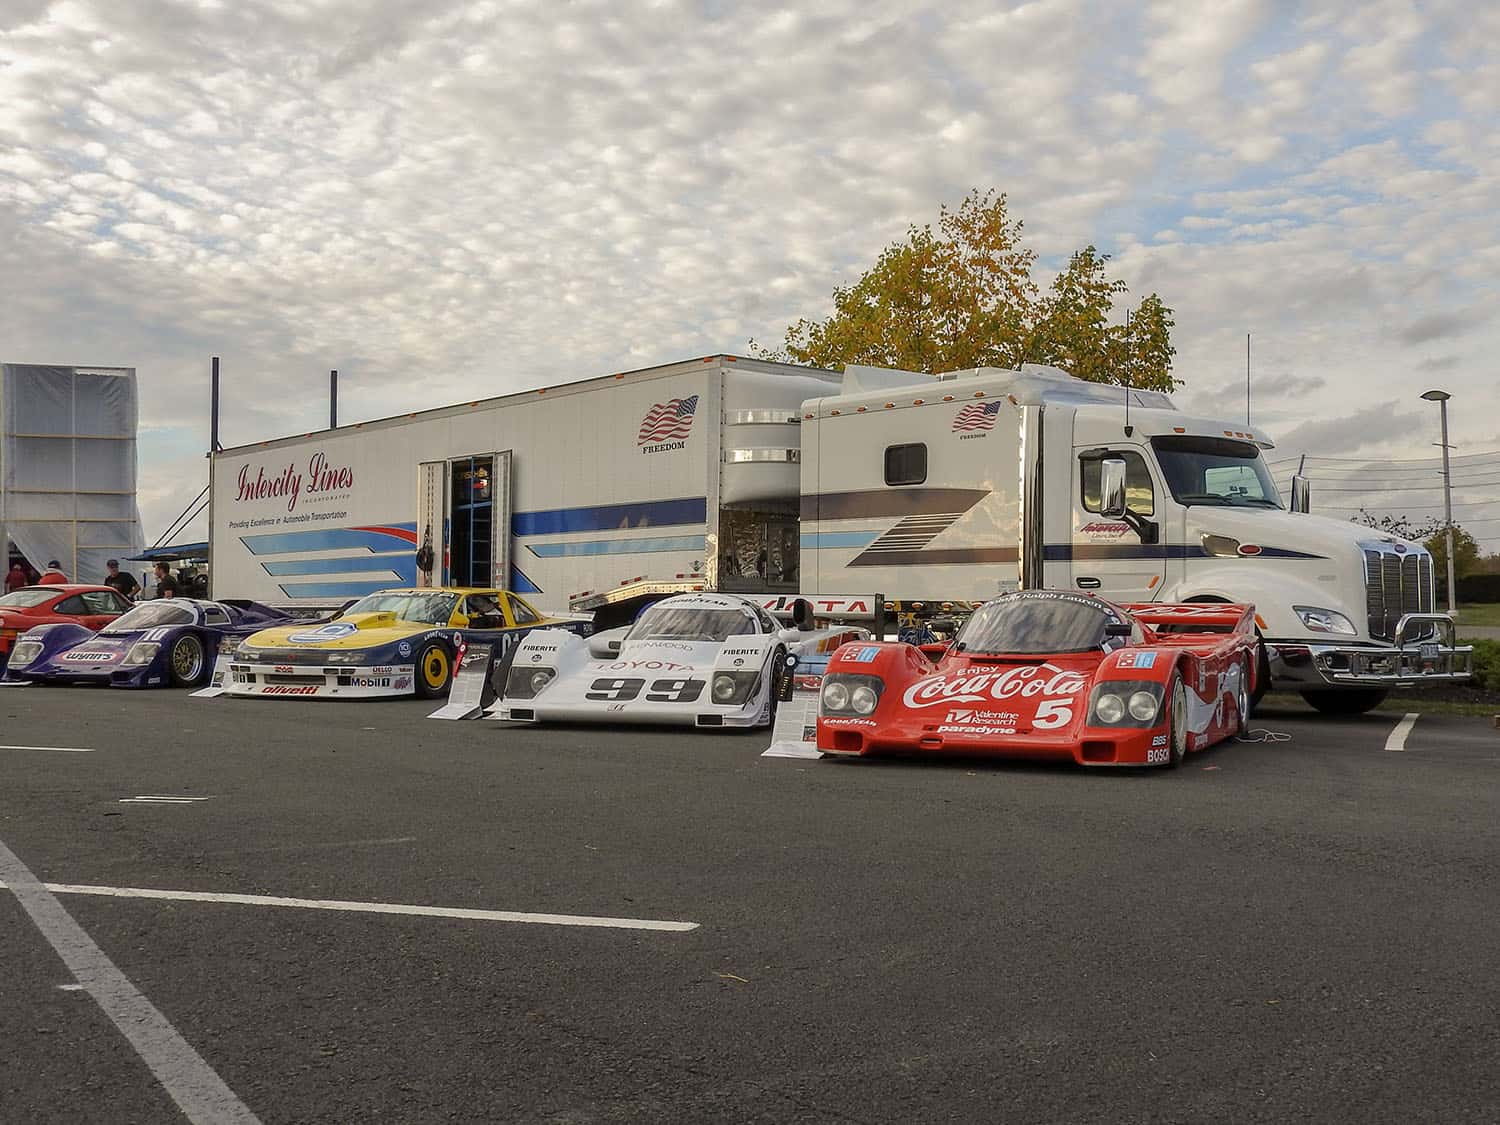 Vehicle Shipping for Auto Racing Teams: Getting to the Track in Style